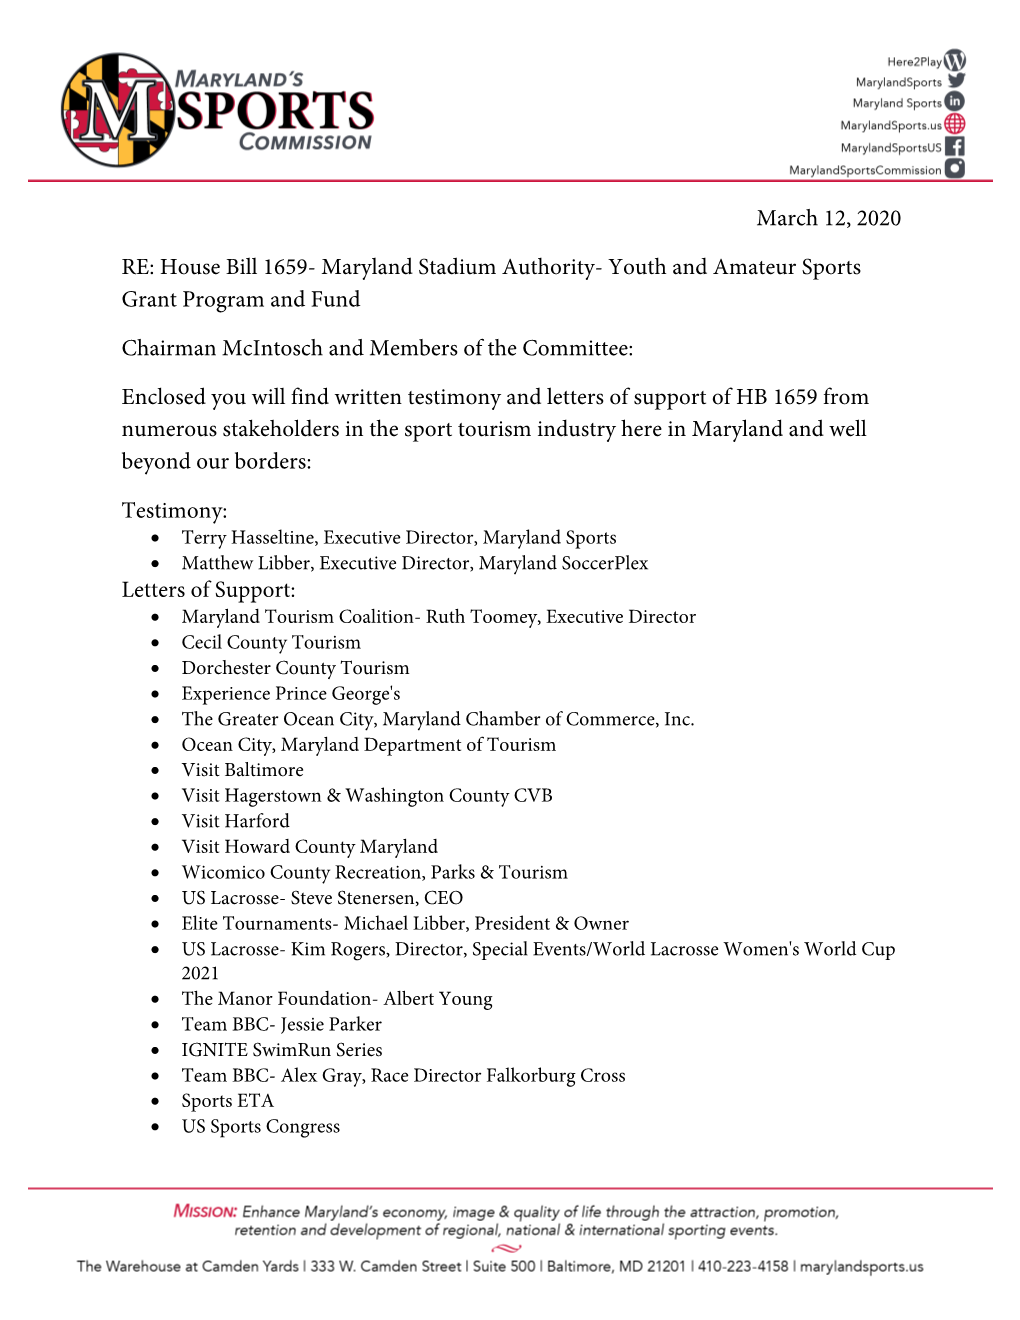 March 12, 2020 RE: House Bill 1659- Maryland Stadium Authority- Youth